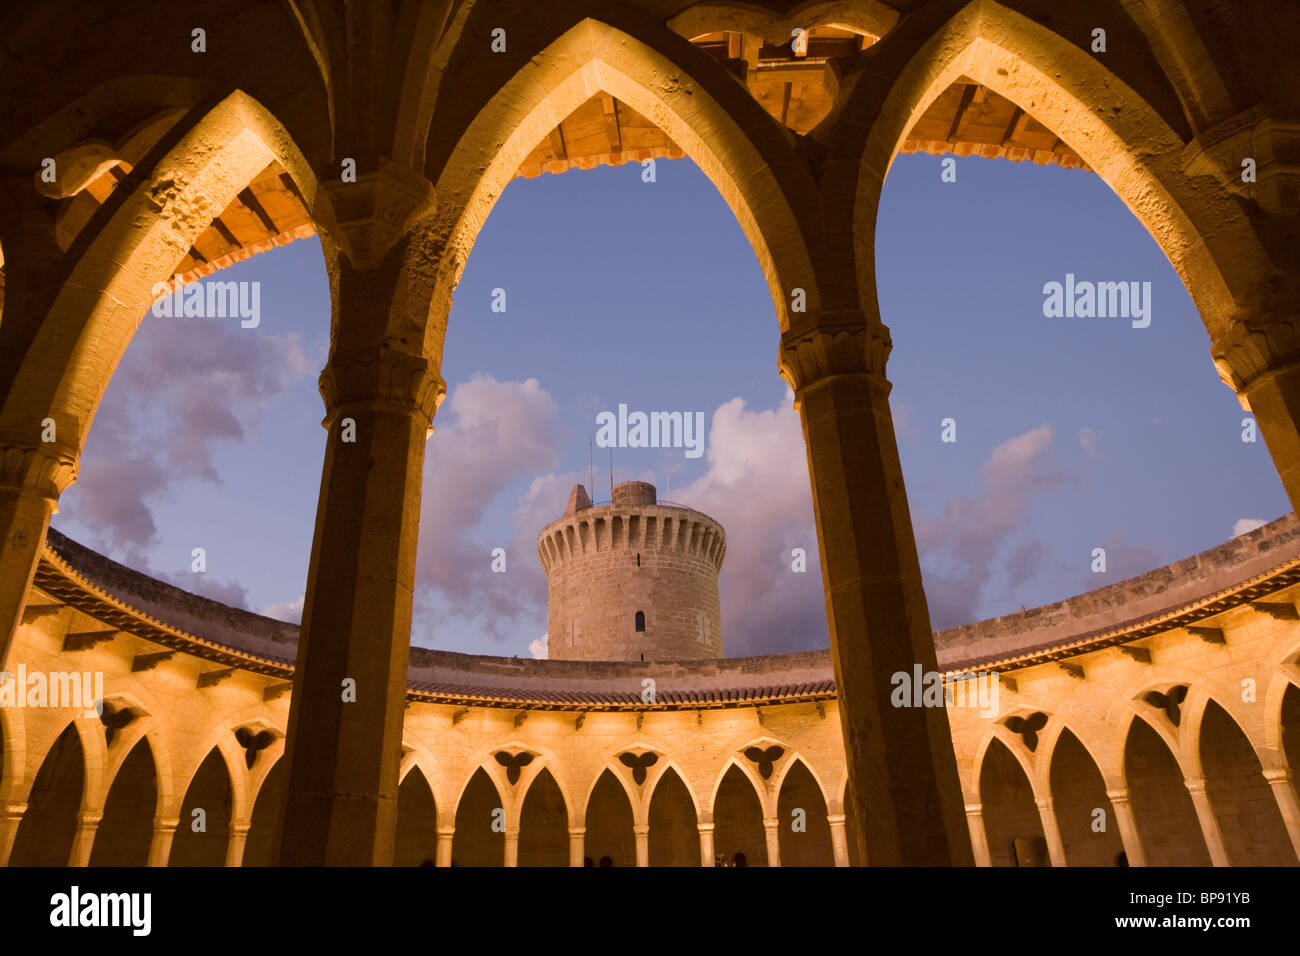 Castell de Bellver with keep tower at dusk, Palma, Mallorca, Balearic Islands, Spain, Europe Stock Photo